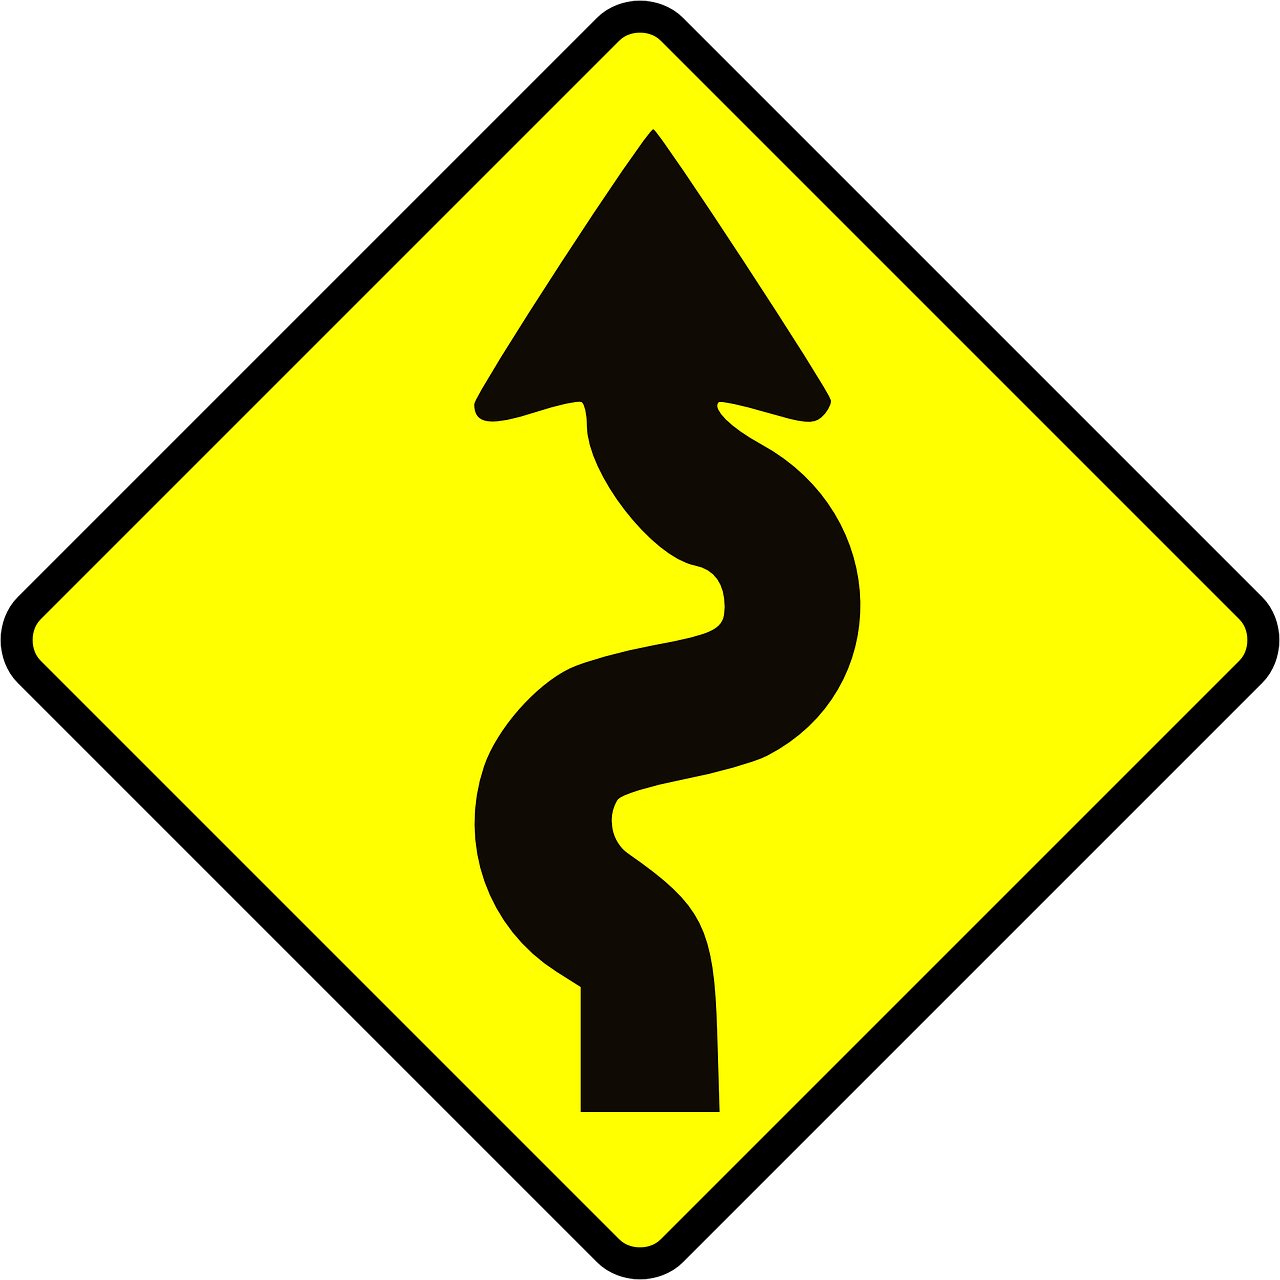 winding,road,caution,signs,windy,dangerous,street,ahead,free vector graphics,free pictures, free photos, free images, royalty free, free illustrations, public domain